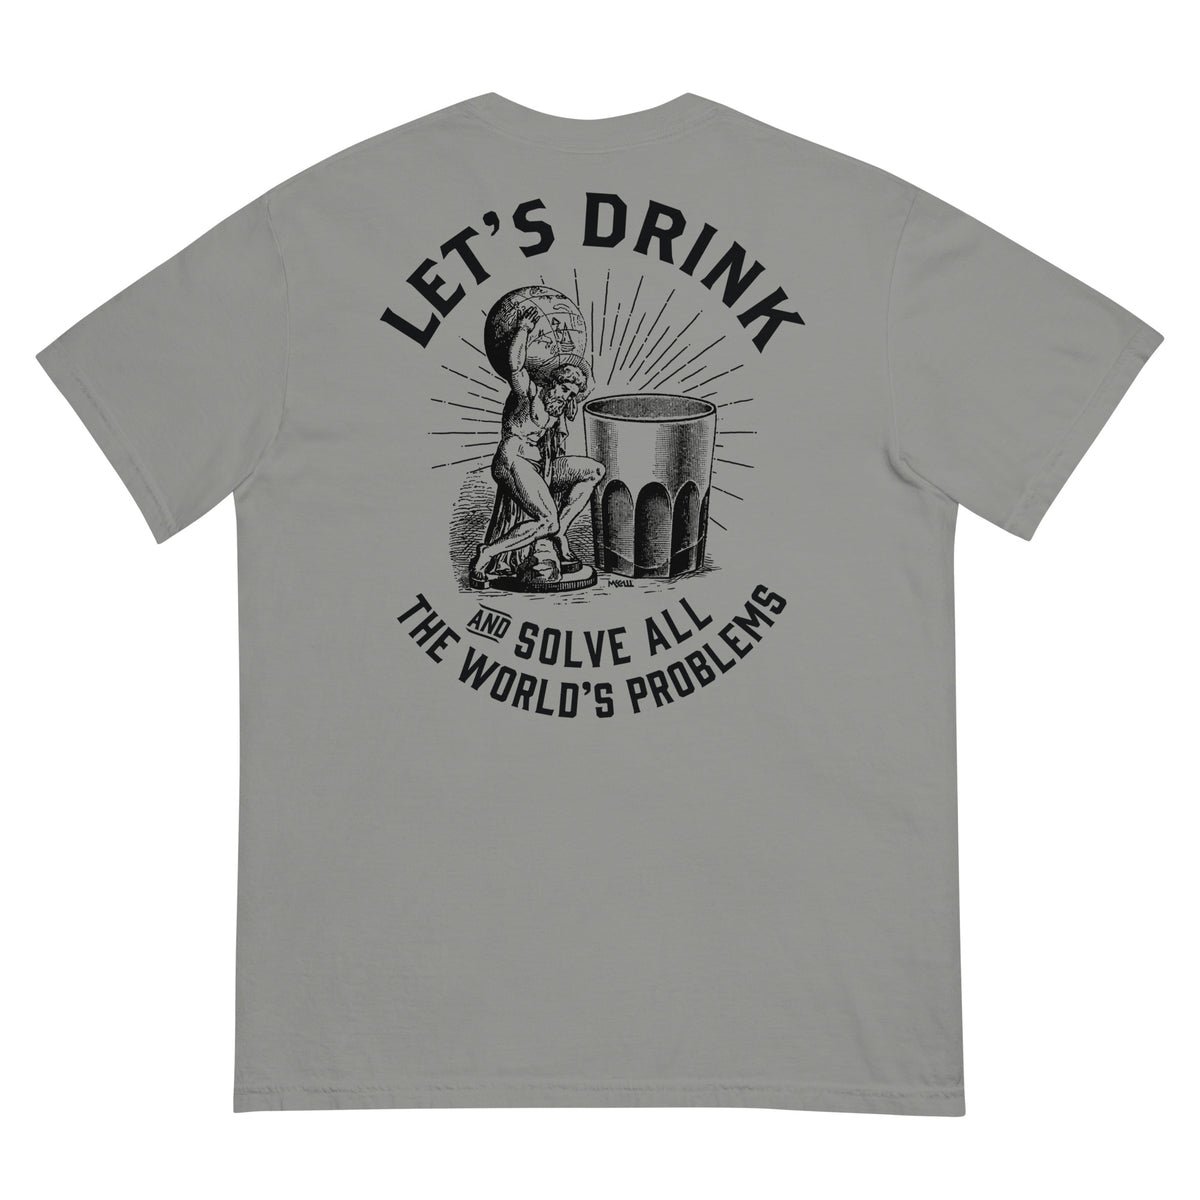 Let&#39;s Drink and Solve All the World&#39;s Problems Men’s Garment-dyed Heavyweight T-shirt